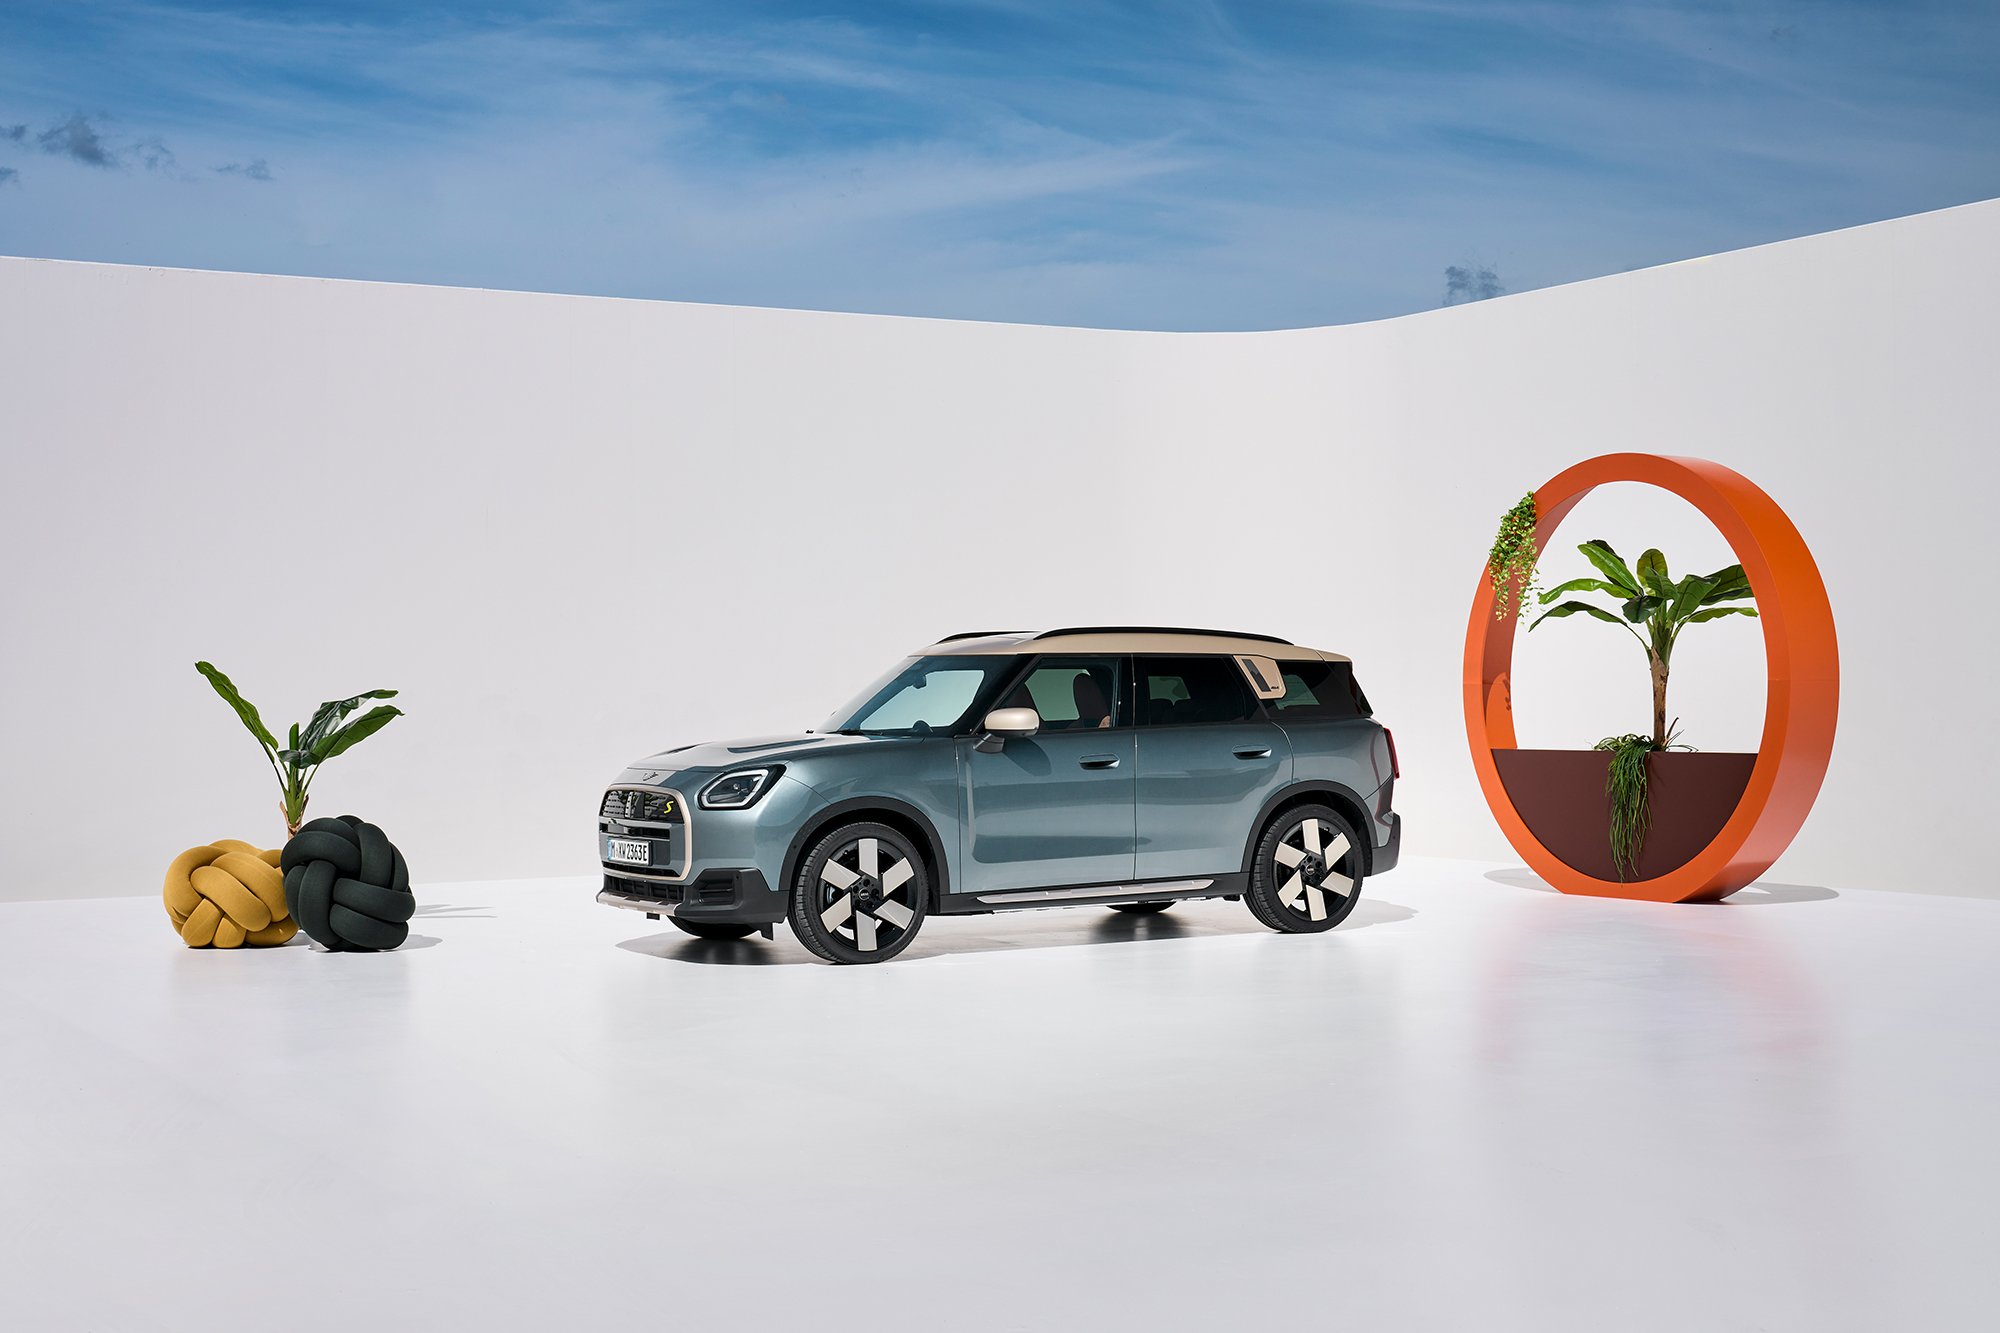 The exterior design of the new all-electric MINI Countryman